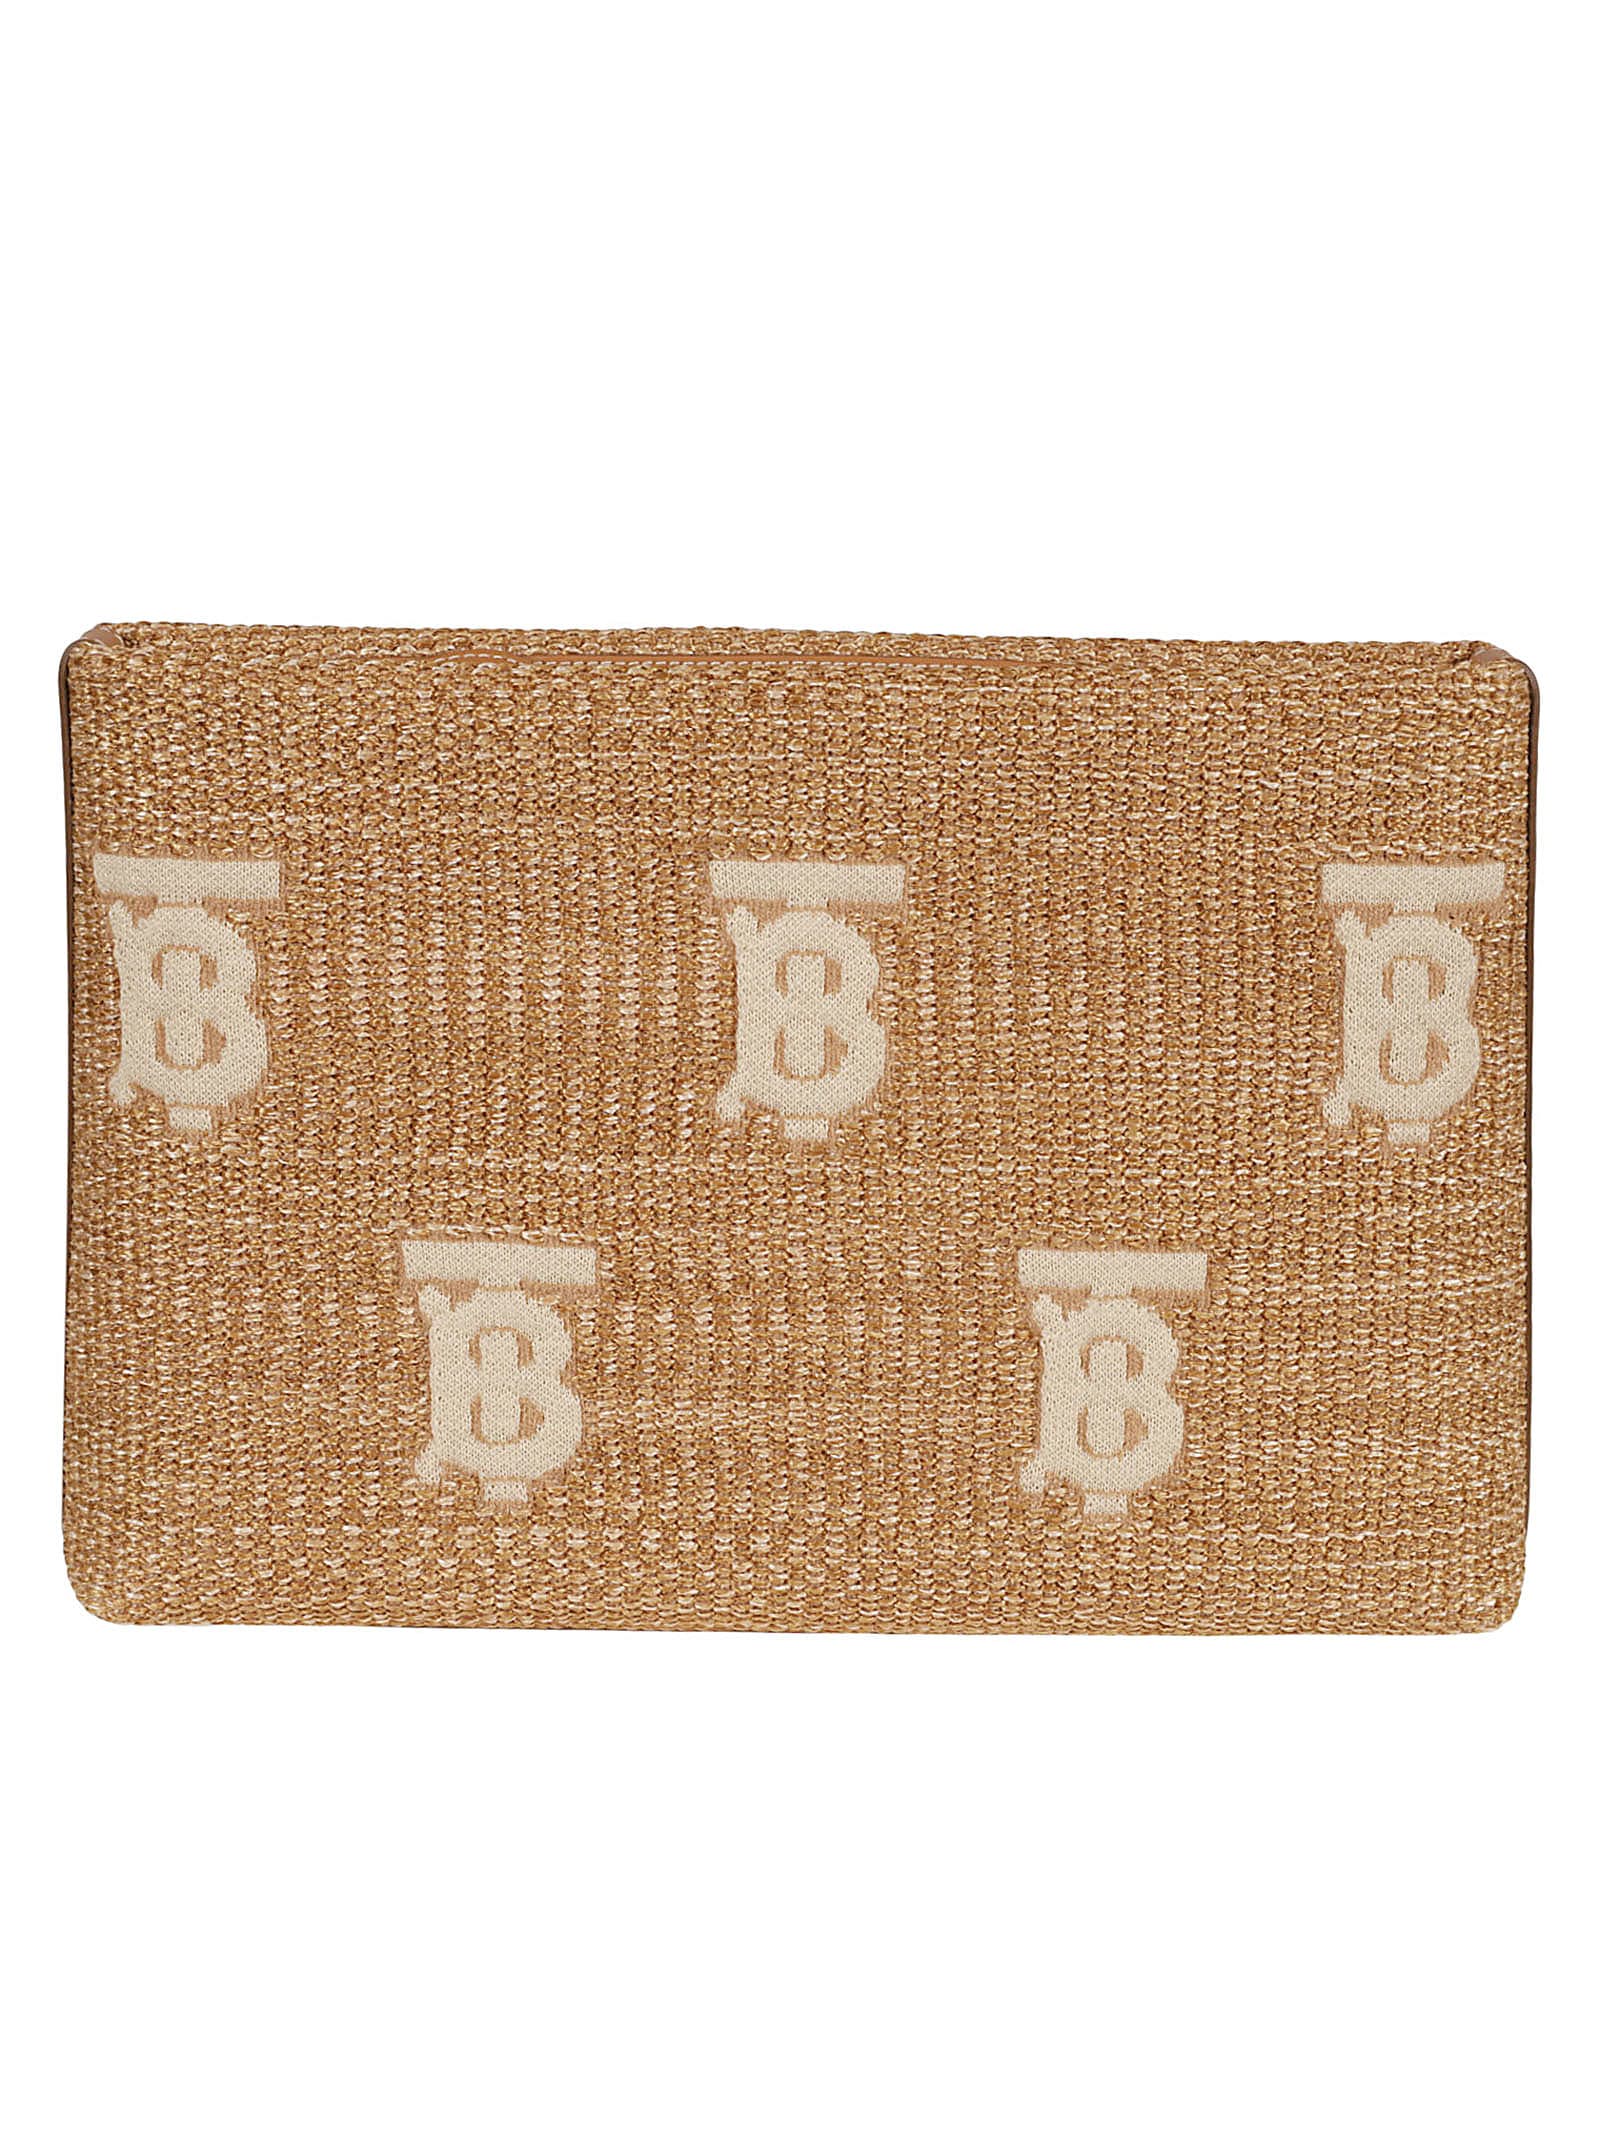 Burberry Logo Weaved Clutch In Brown